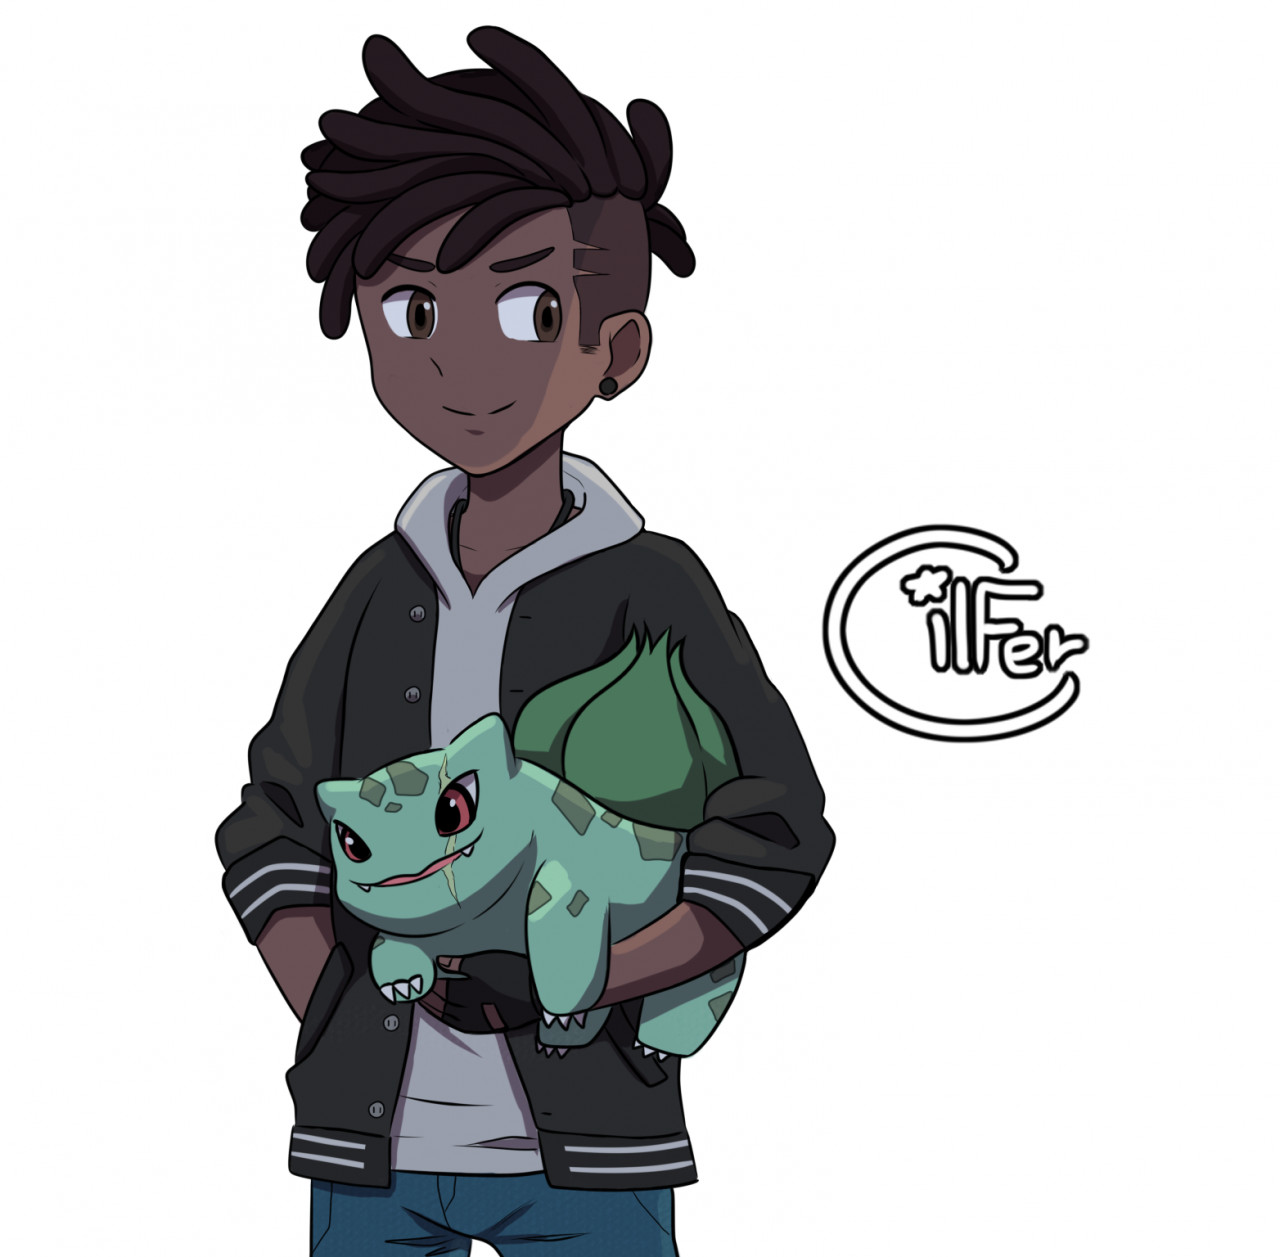 Lexica - Boy with blue hair and black outfit, pokemon trainer